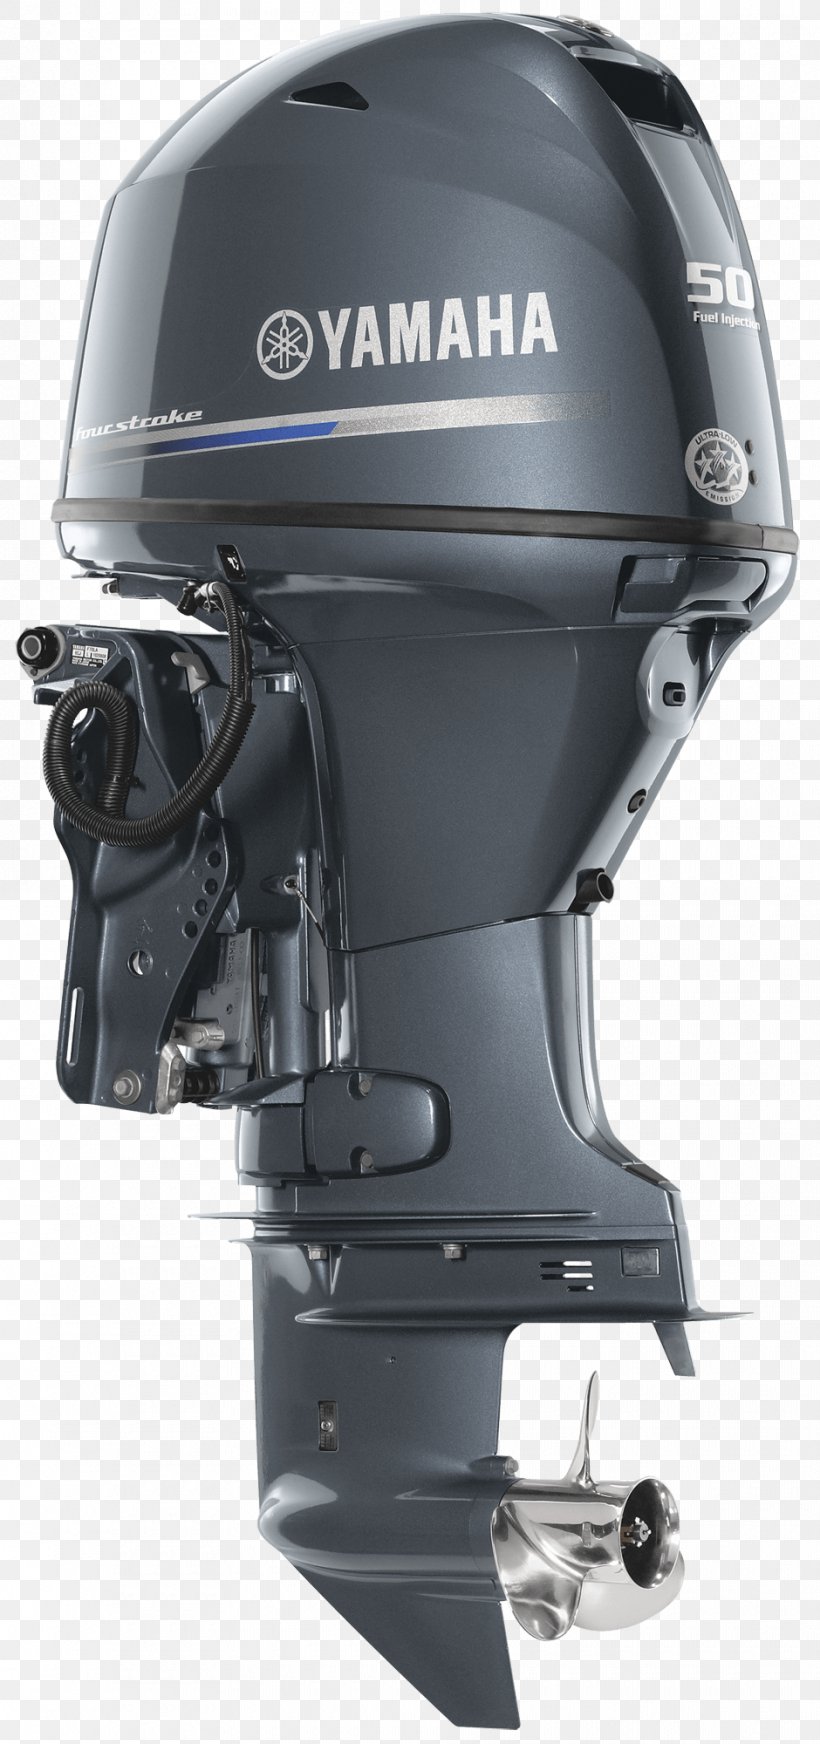 Yamaha Motor Company Outboard Motor Four-stroke Engine Boat, PNG, 940x2000px, Yamaha Motor Company, Bicycle Clothing, Bicycle Helmet, Bicycles Equipment And Supplies, Boat Download Free